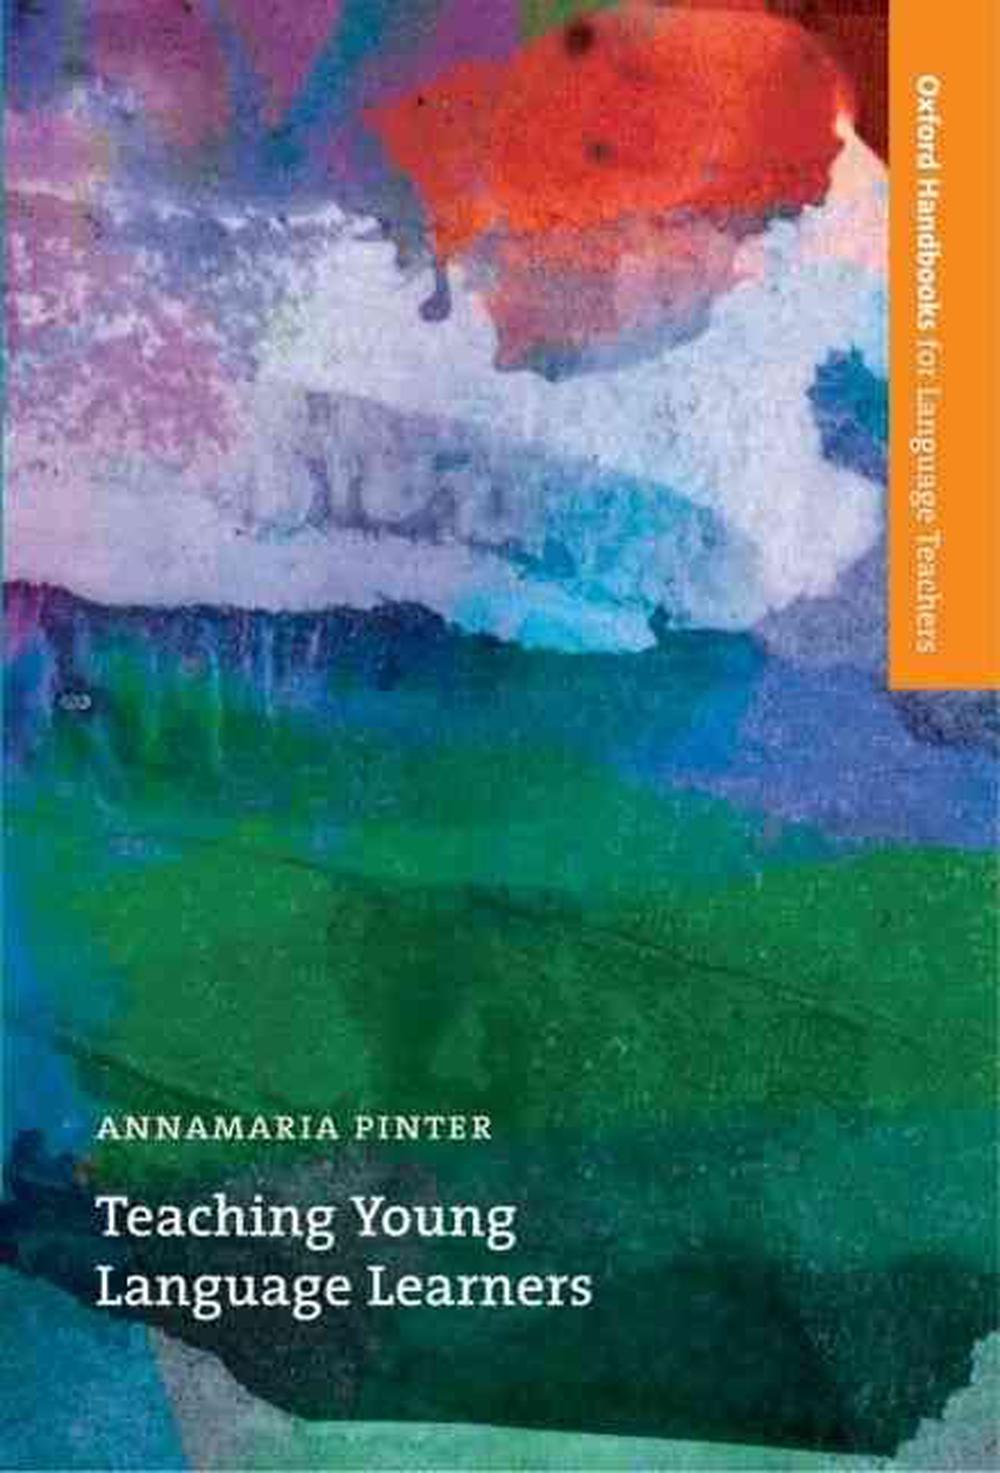 Teaching Young Language Learners by Annamaria Pinter, Paperback